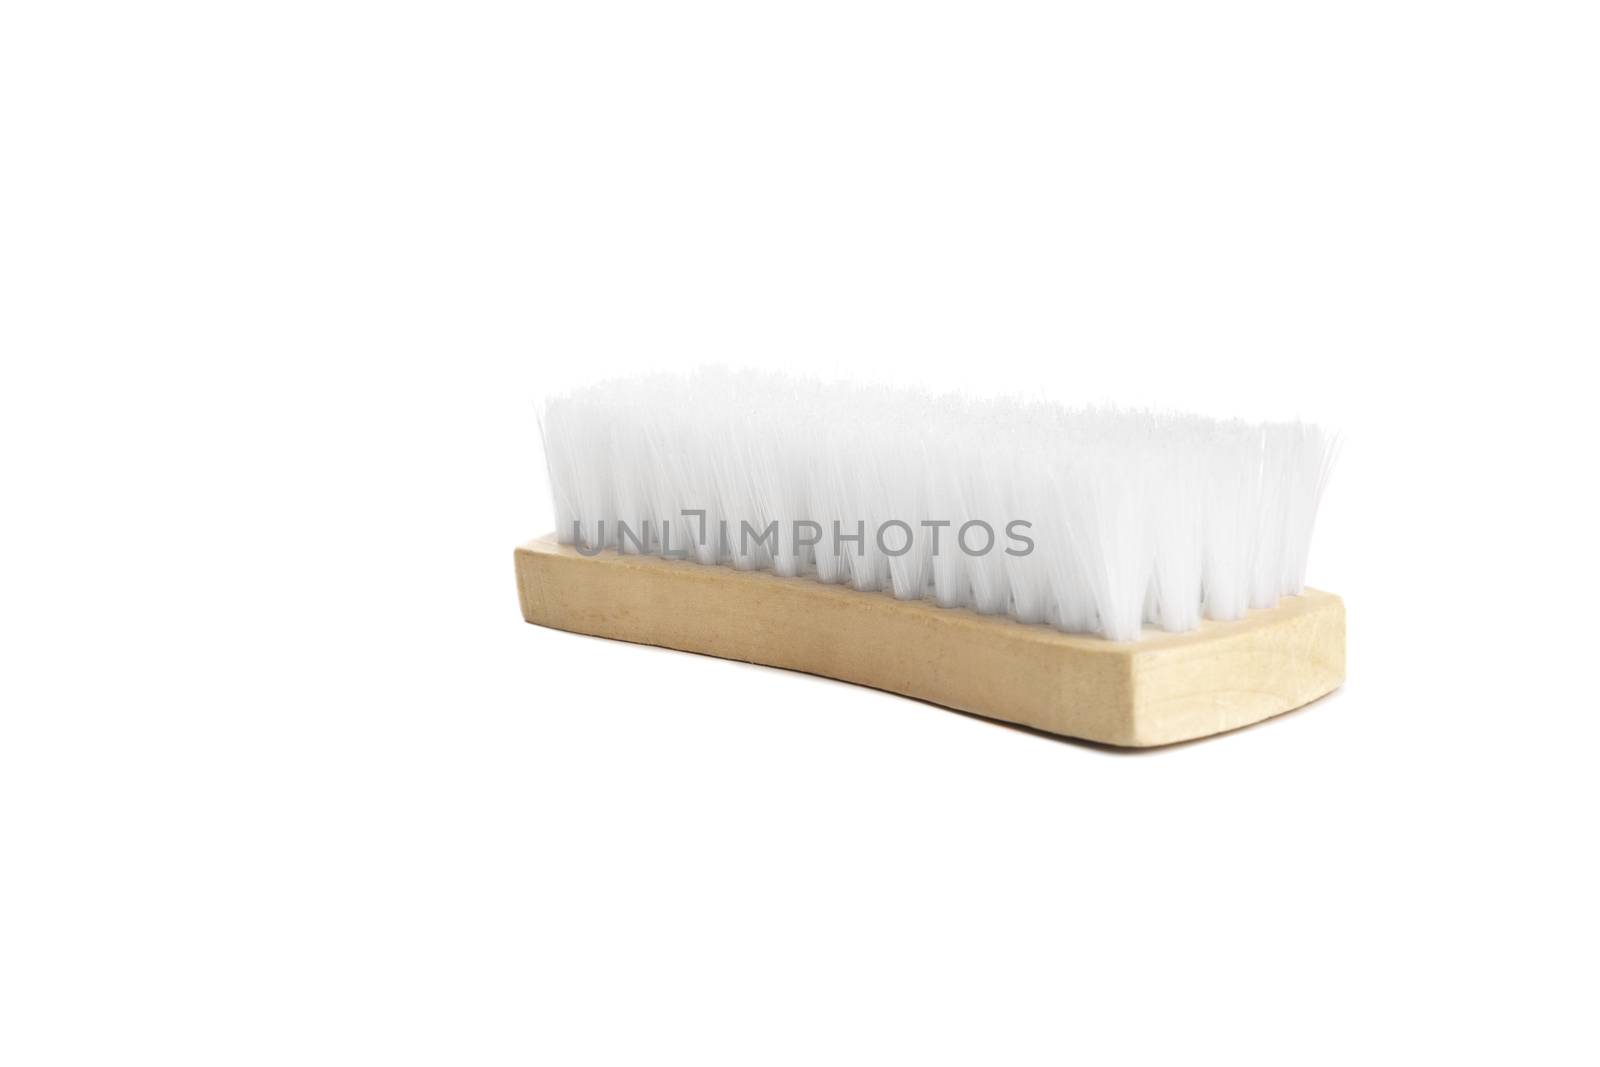 clothes cleaning brush close-up isolated on white background by SlayCer